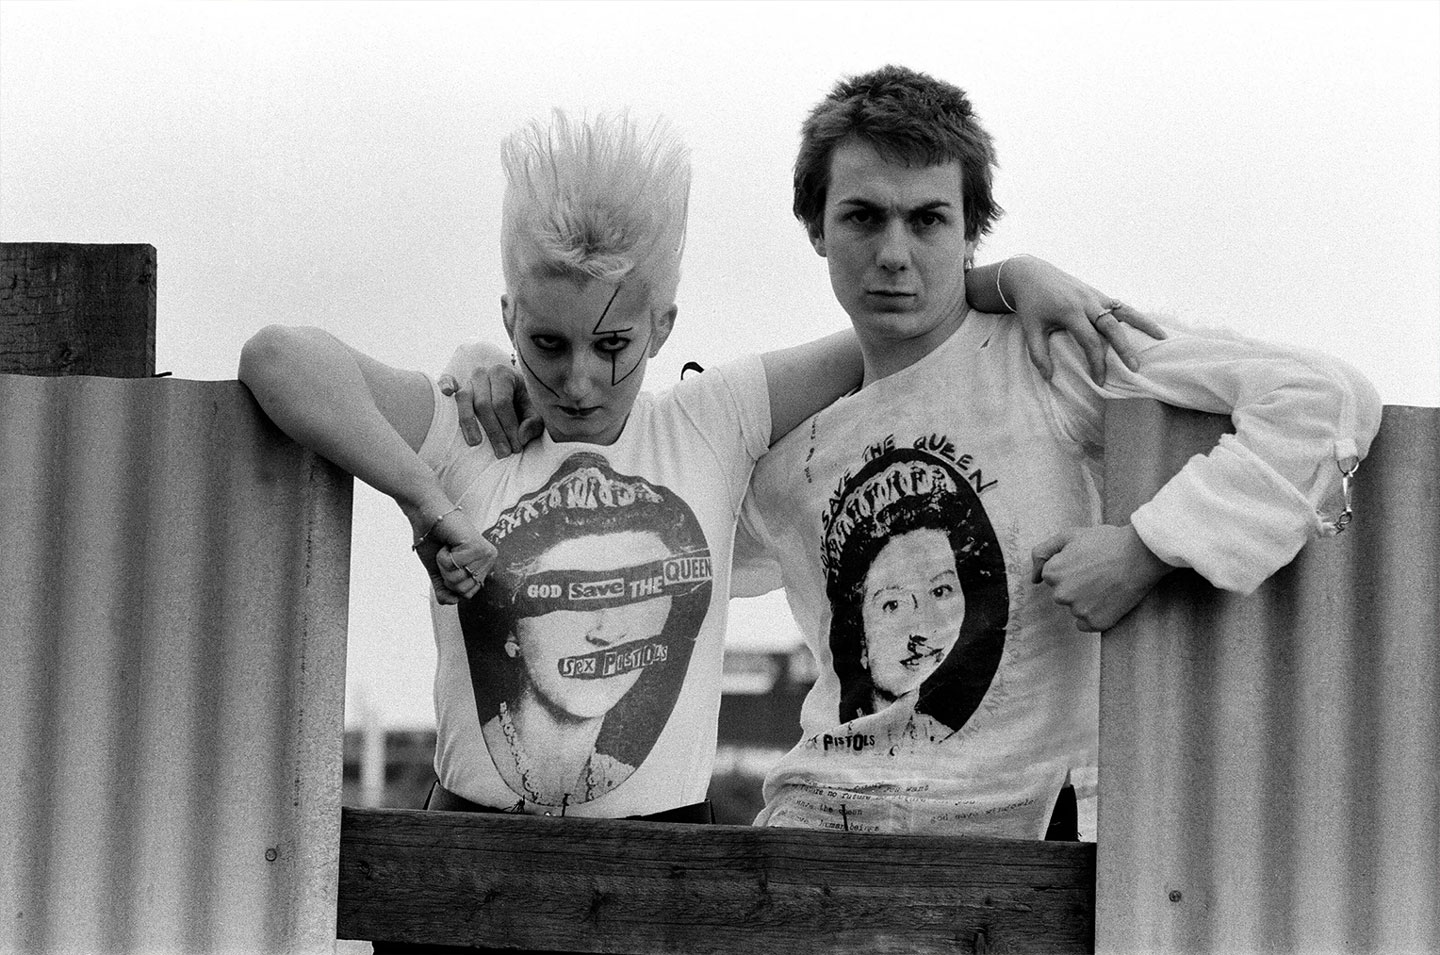 Clothing from the Seditionaries boutique on King's Road, London, 18th May 1977. Pamela Rooke (1955 - 2022), aka Jordan, and Simon Barker, aka Six, are modelling Sex Pistols 'God Save The Queen' T-shirts. Seditionaries, formerly known as Sex, is run by Vivienne Westwood and Malcolm McLaren